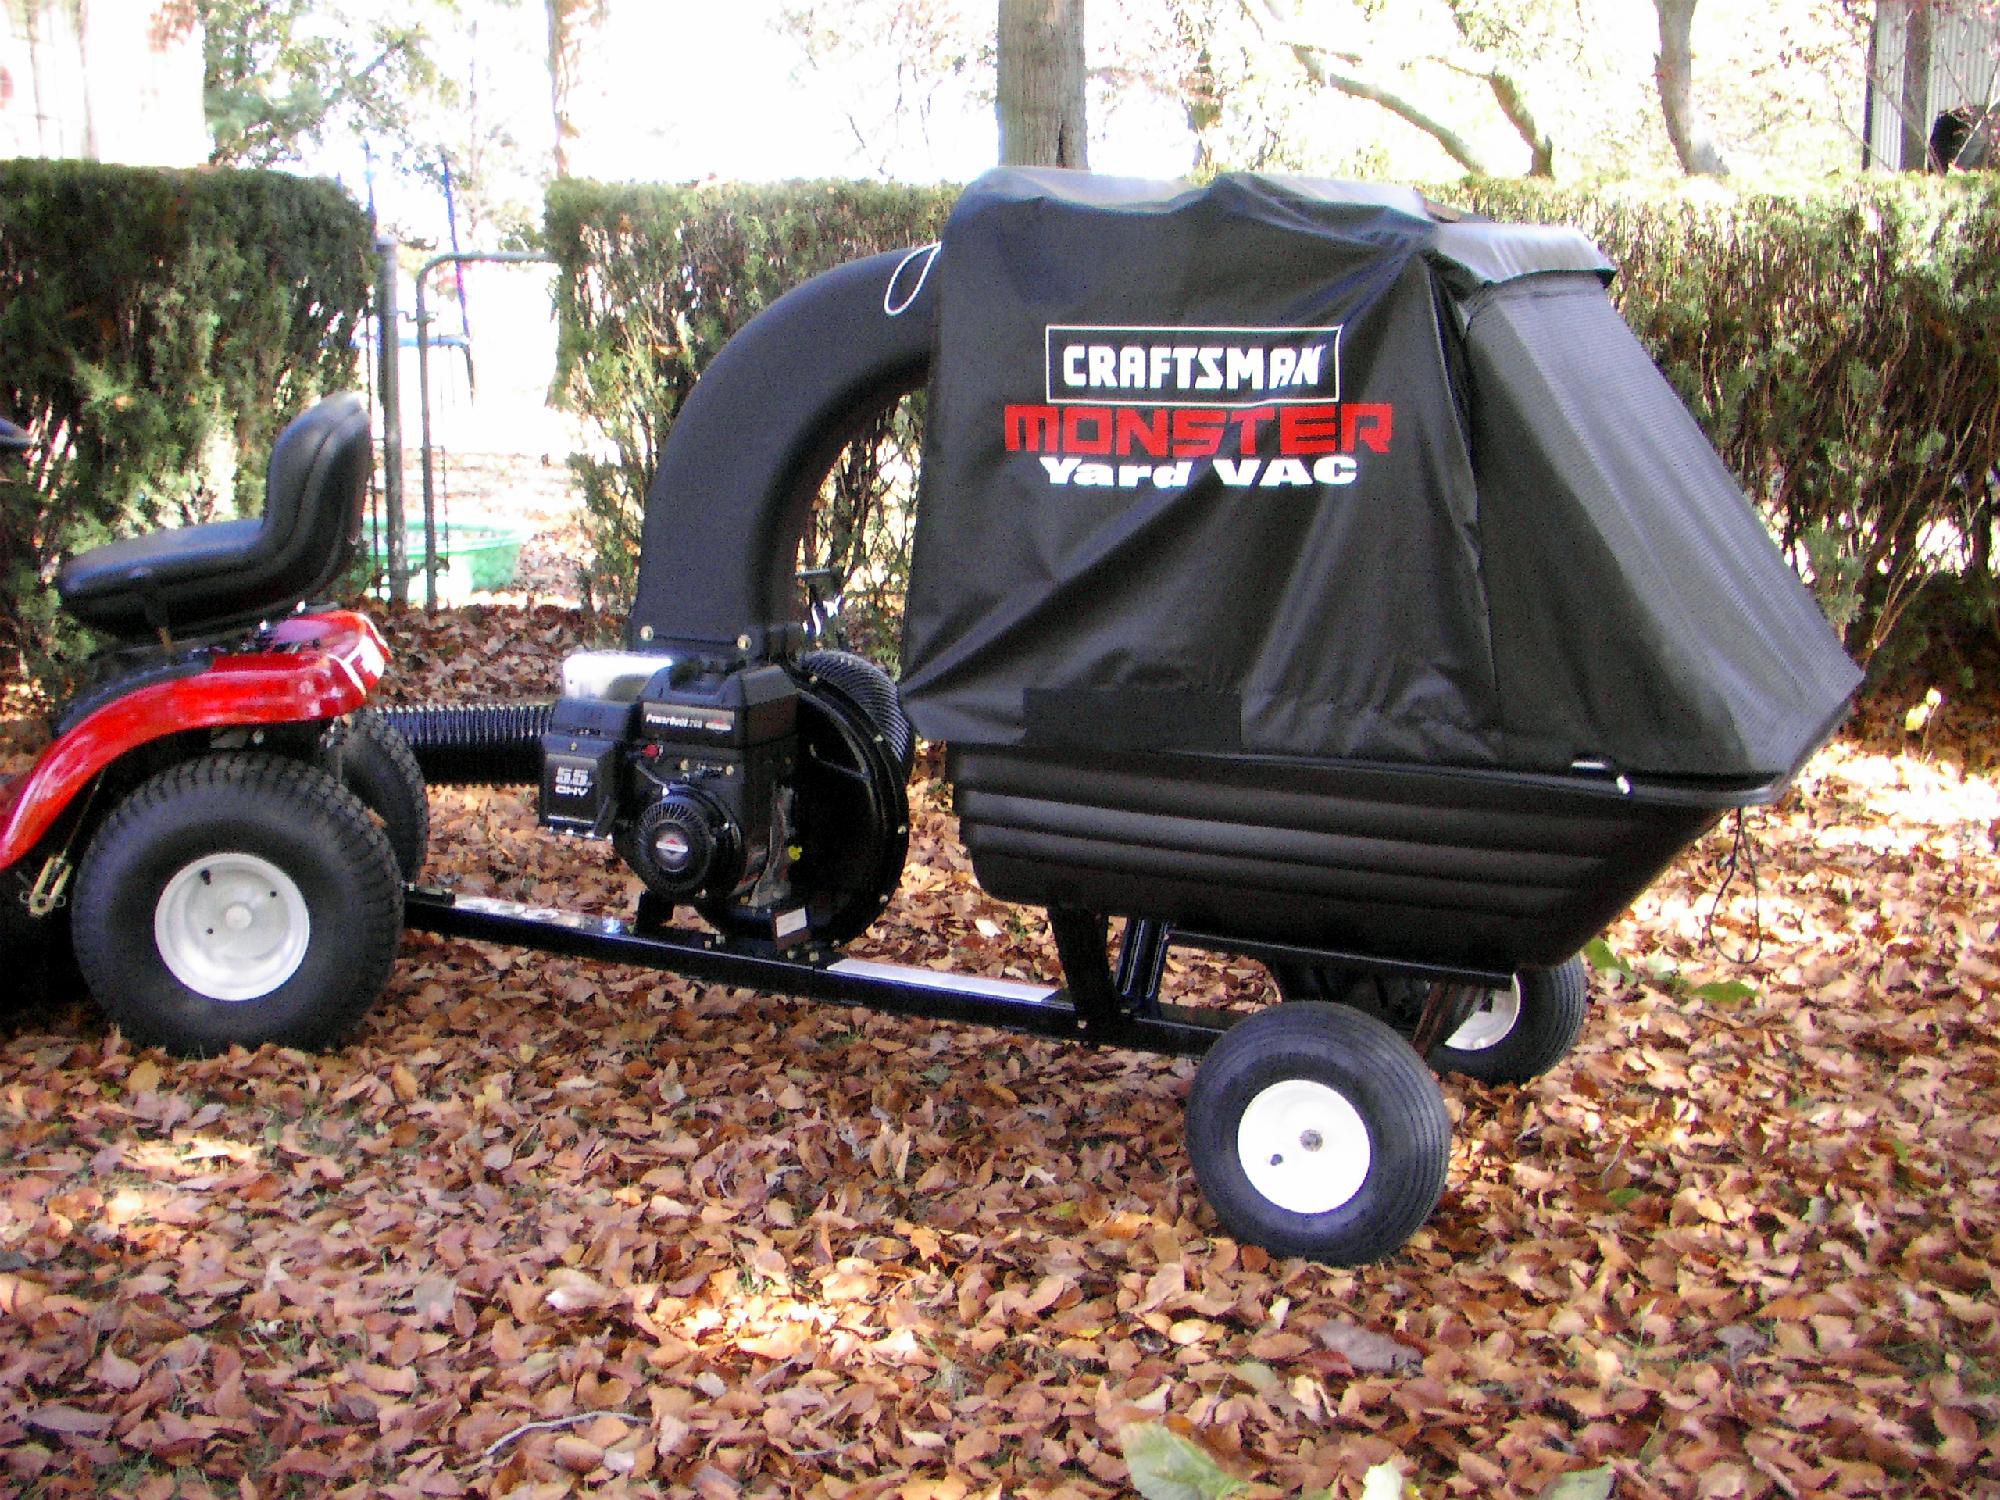 Craftsman Poly Mow N Vac Lawn Garden Tractor Attachments Lawn Sweepers Vacs